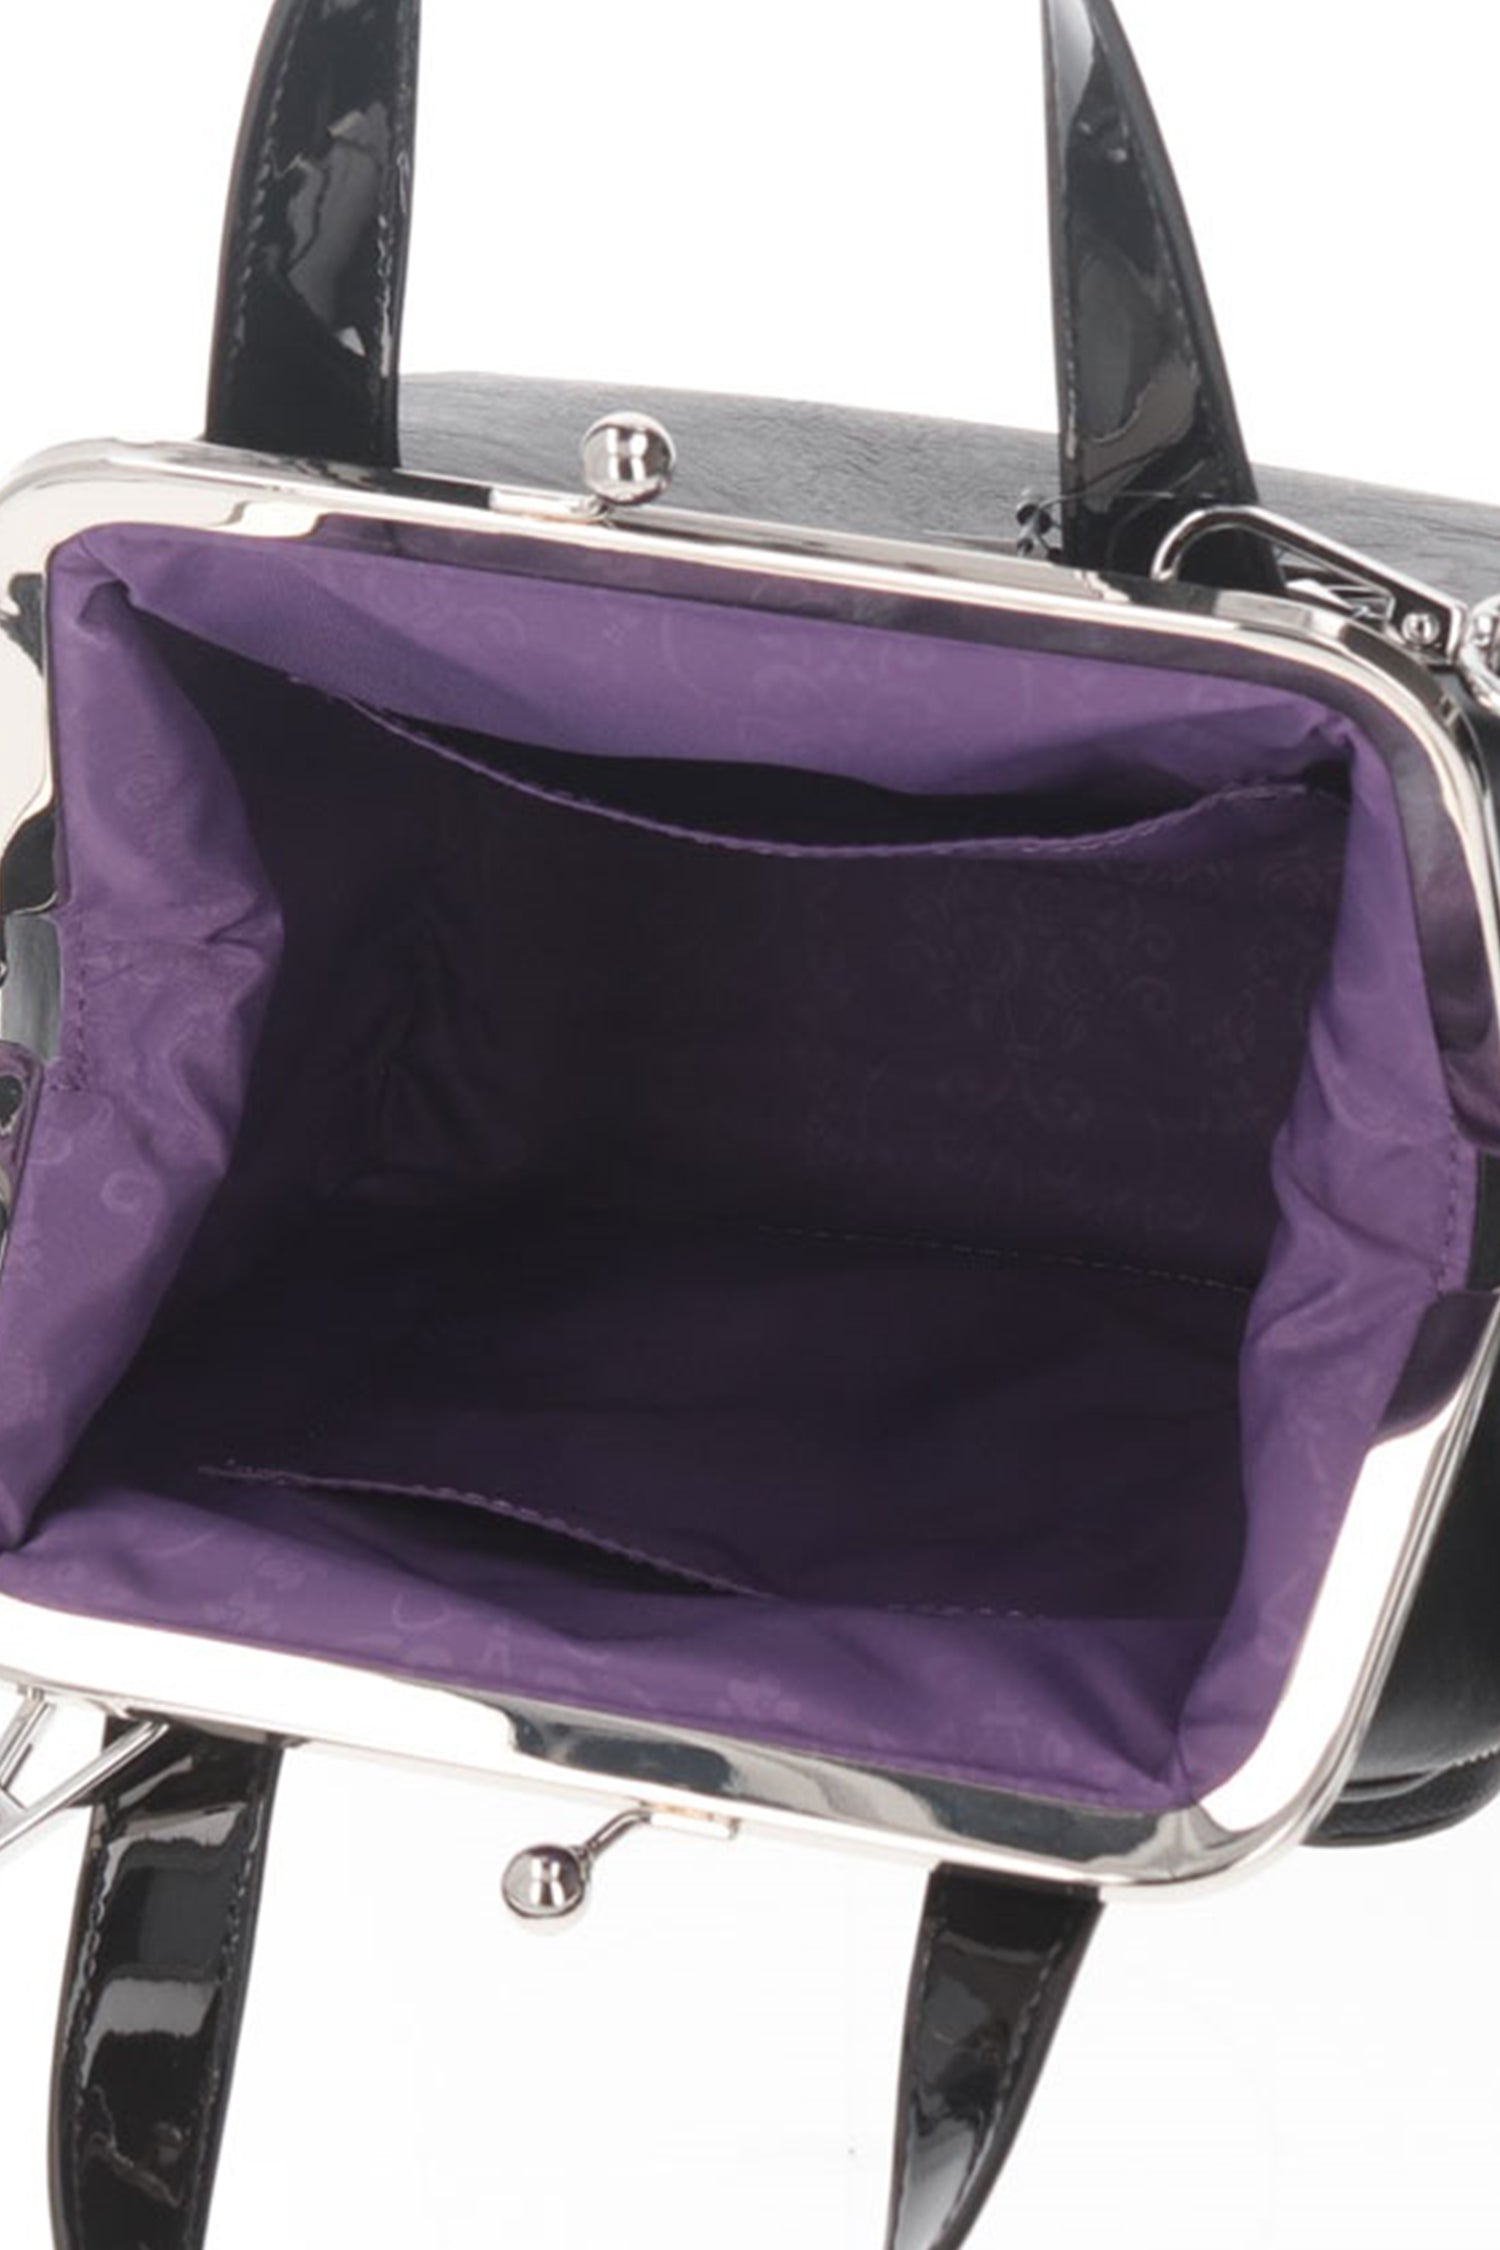 When open, Metallica Clasp Crossbody Bag Black, Purple inside is with plenty of space to carry a lot of your belonging